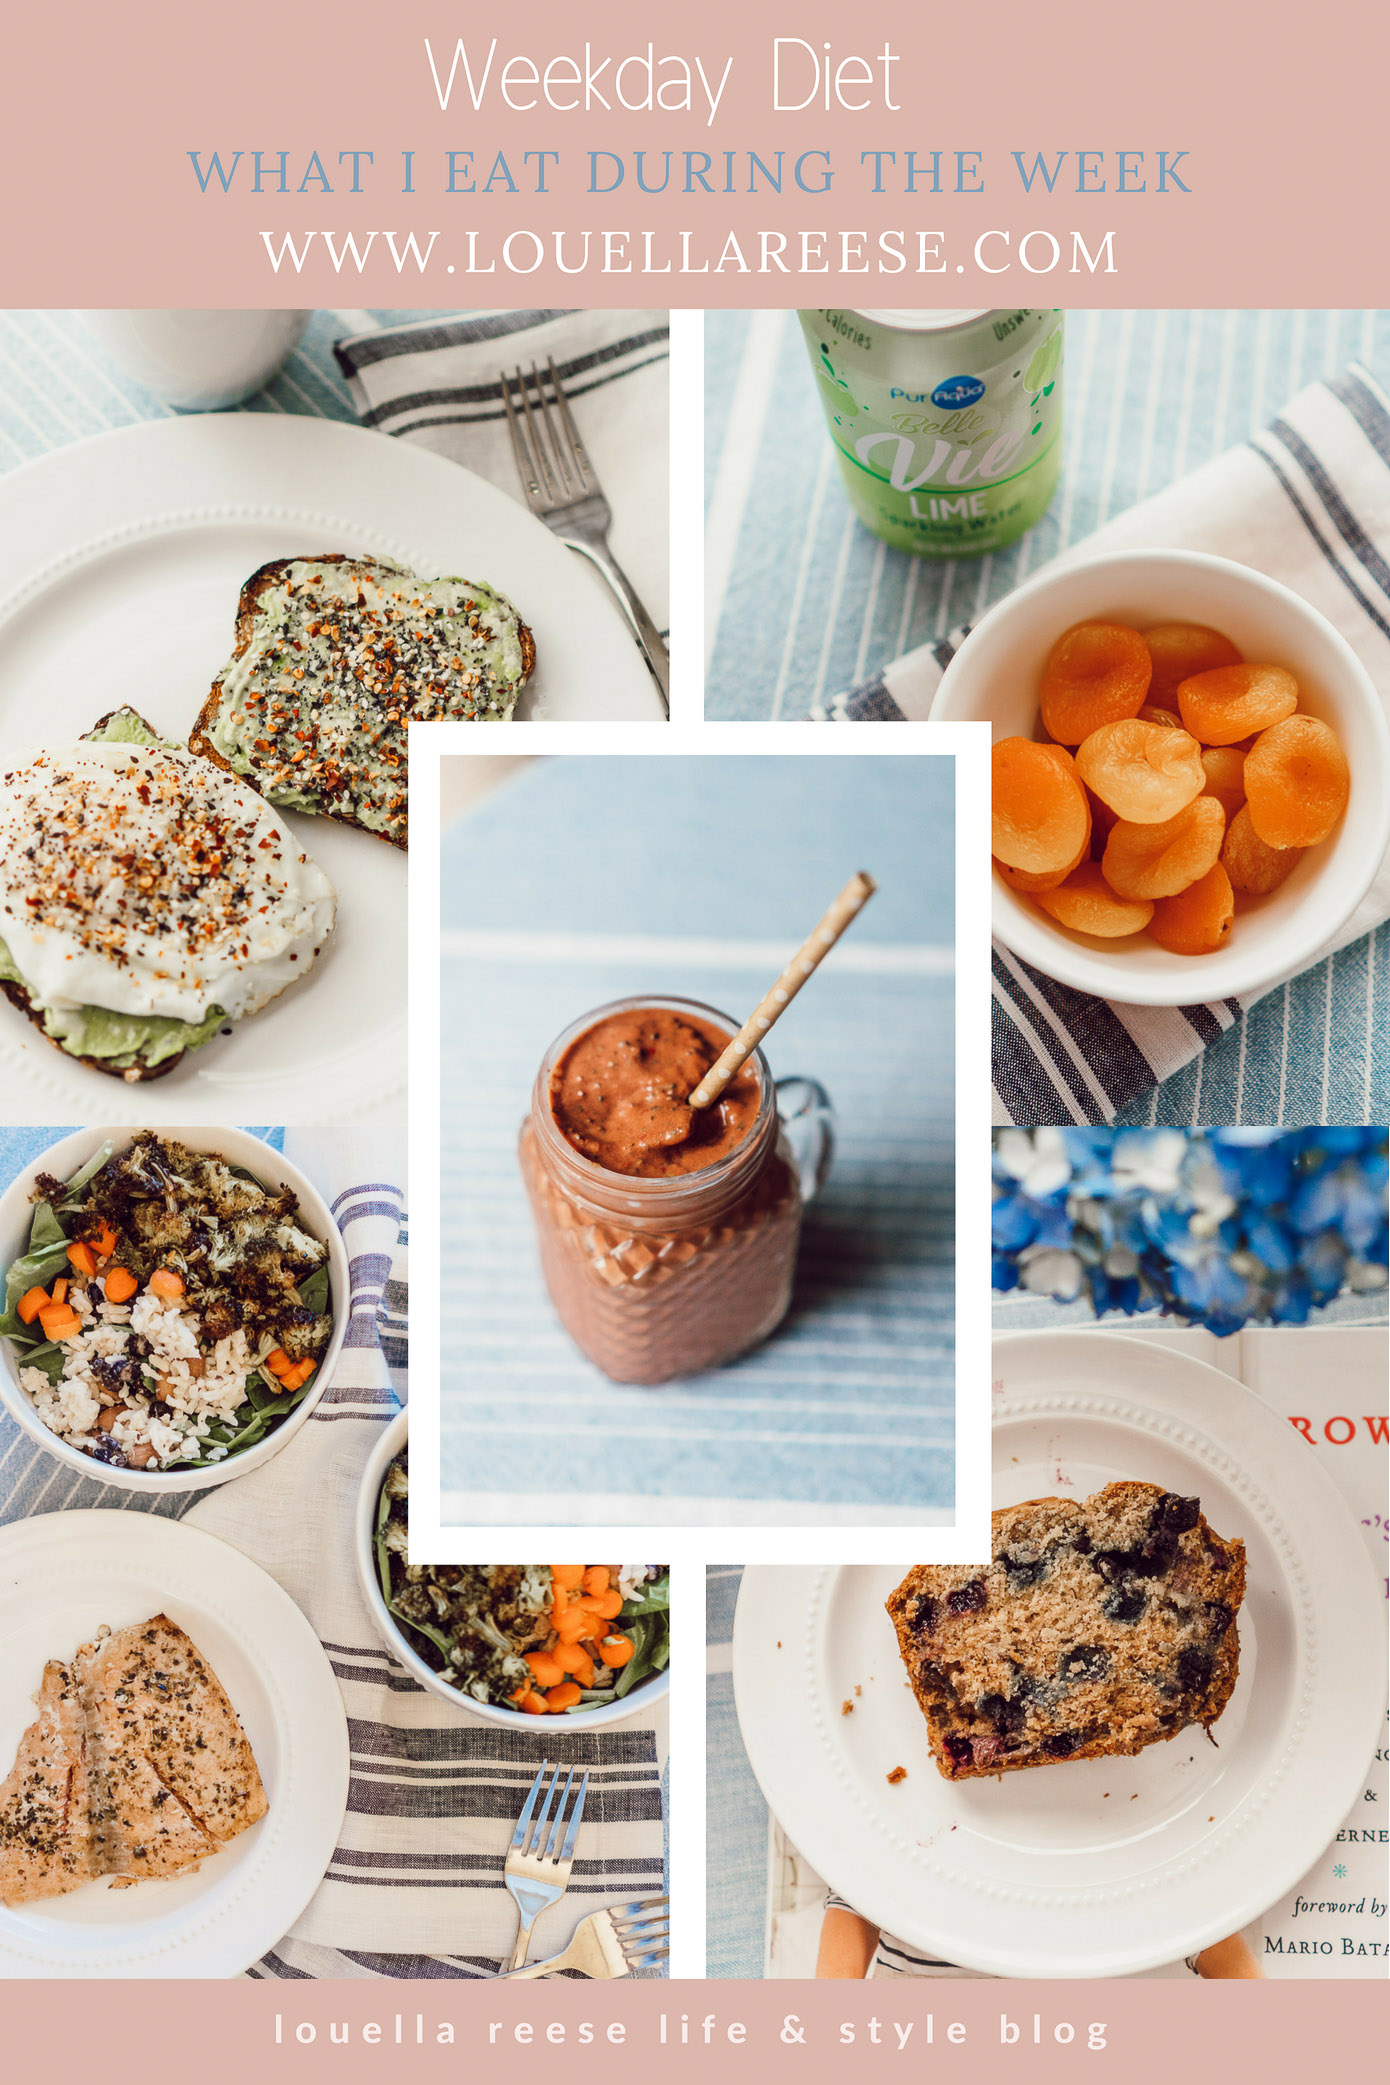 What I Eat During the Week, Weekday Diet featured on Louella Reese